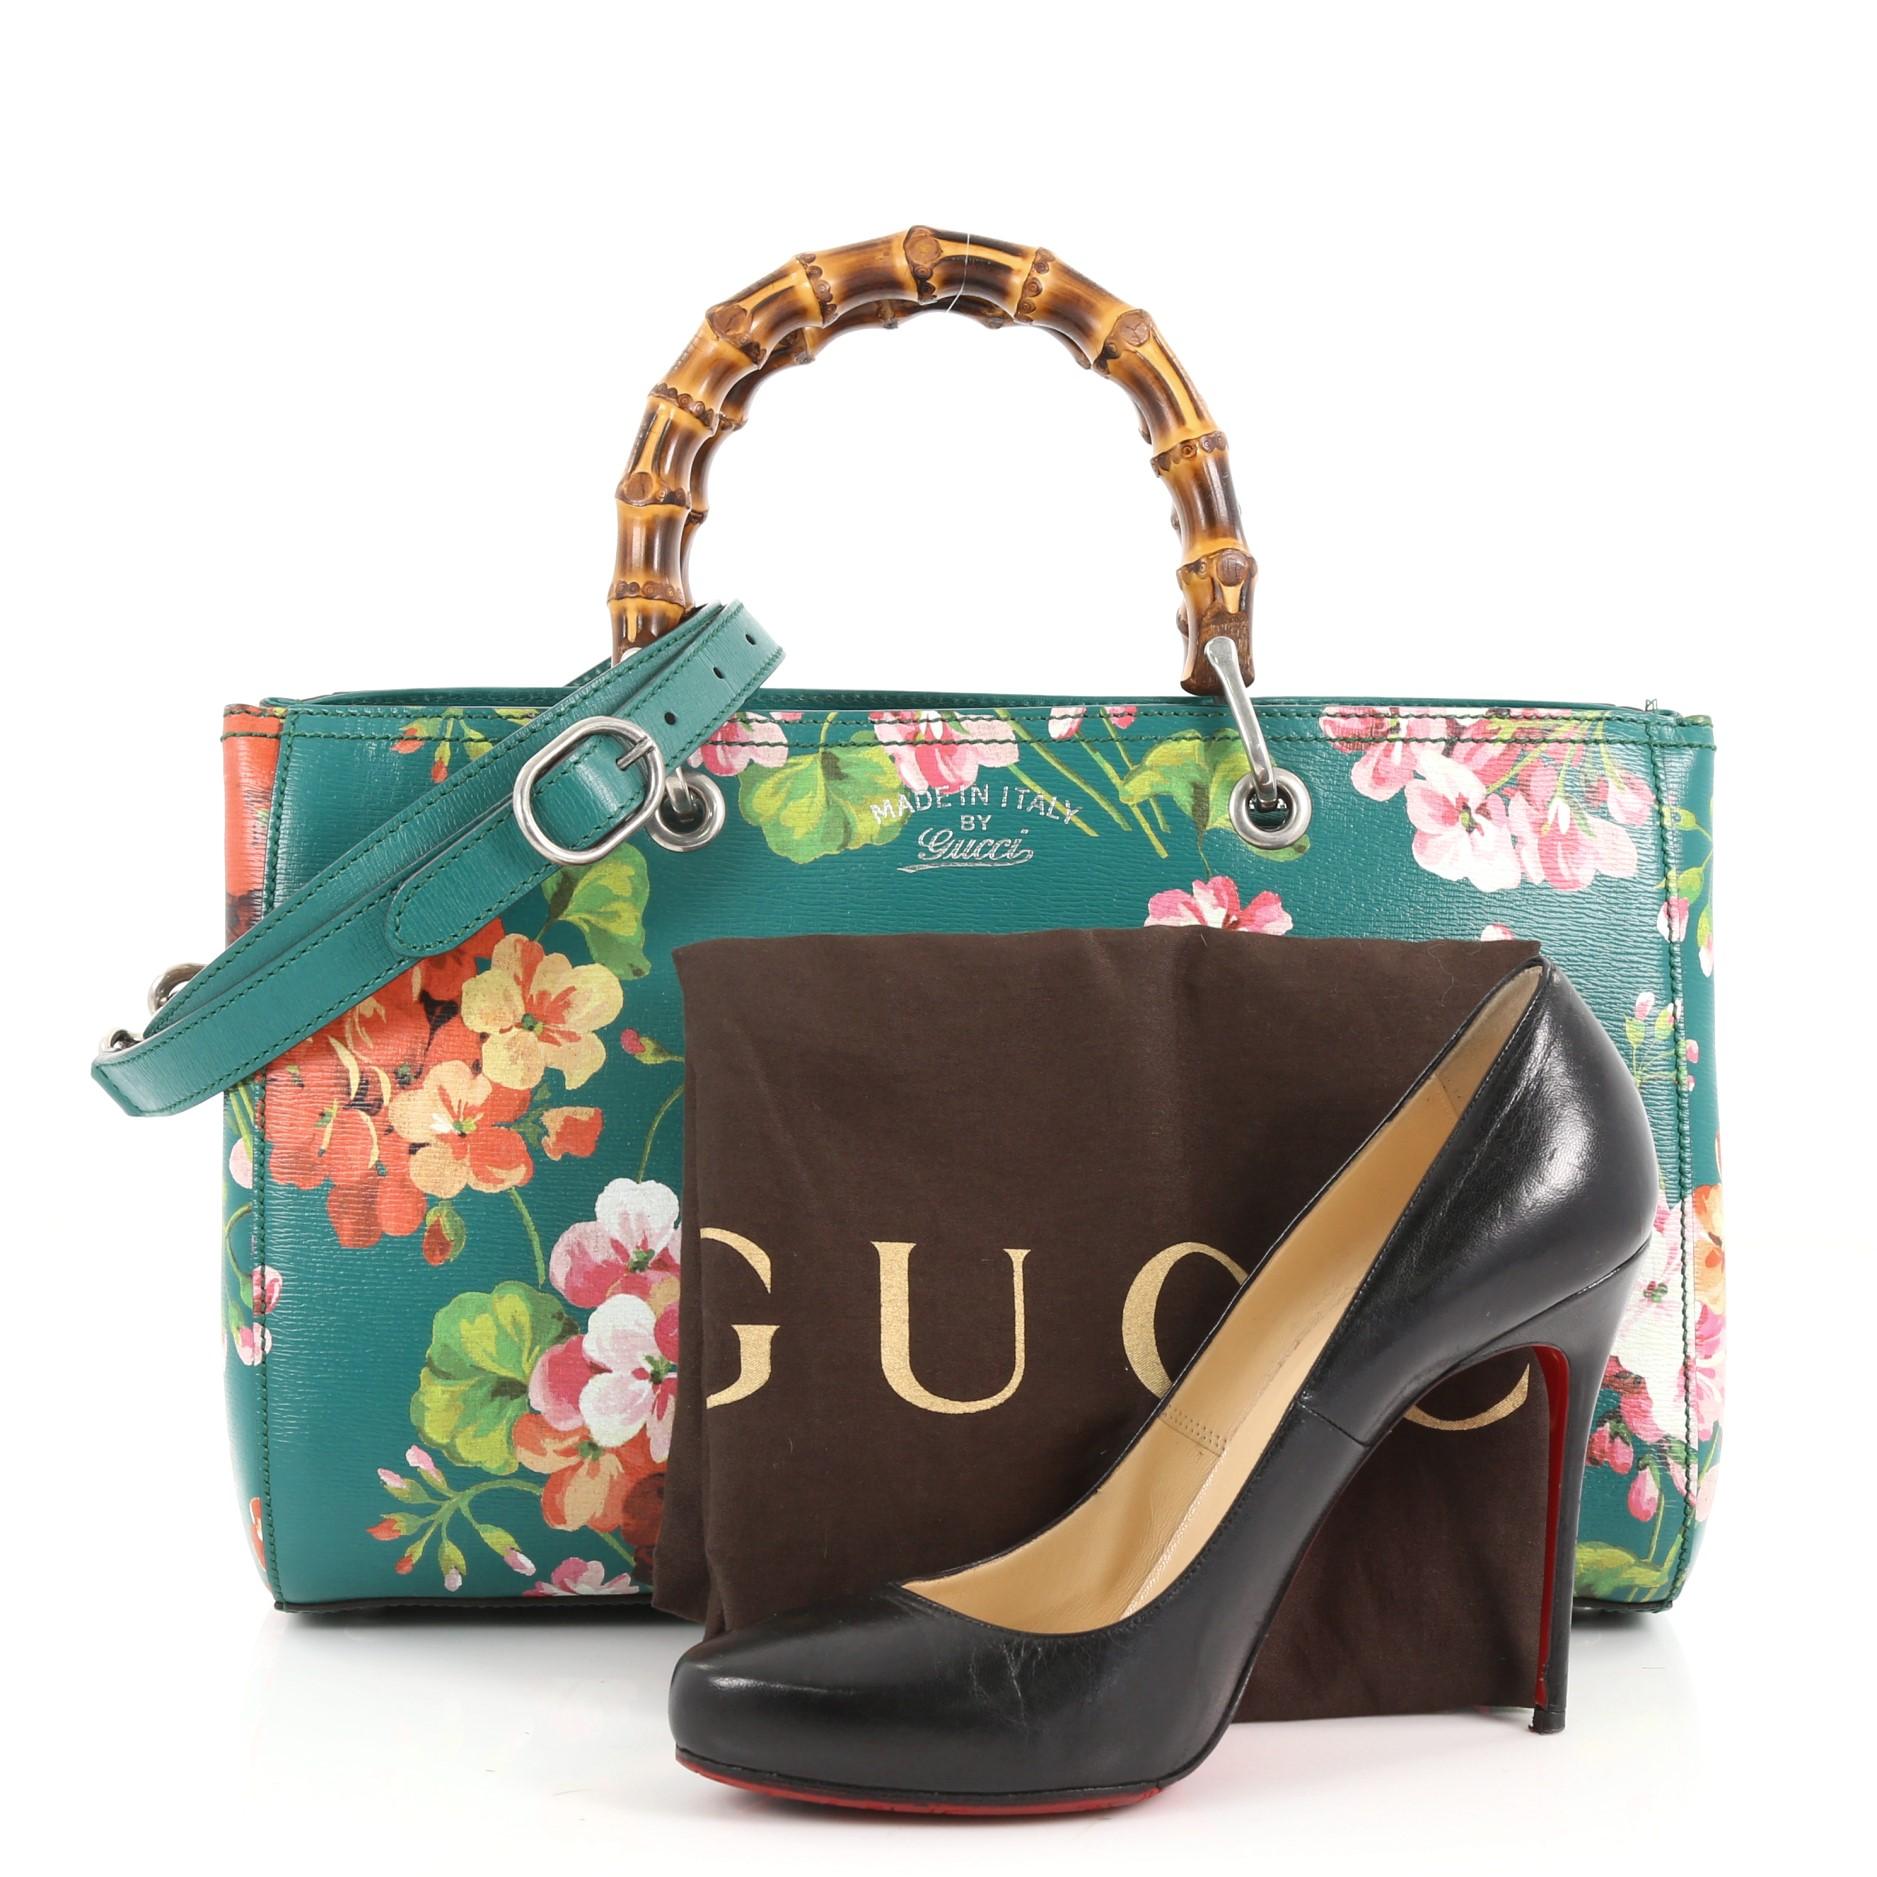 This authentic Gucci Bamboo Shopper Tote Blooms Print Leather Medium is a classic must-have. Crafted from green blooms print leather, this simple yet stylish tote features Gucci's signature sturdy bamboo handles, protective base studs, stamped logo